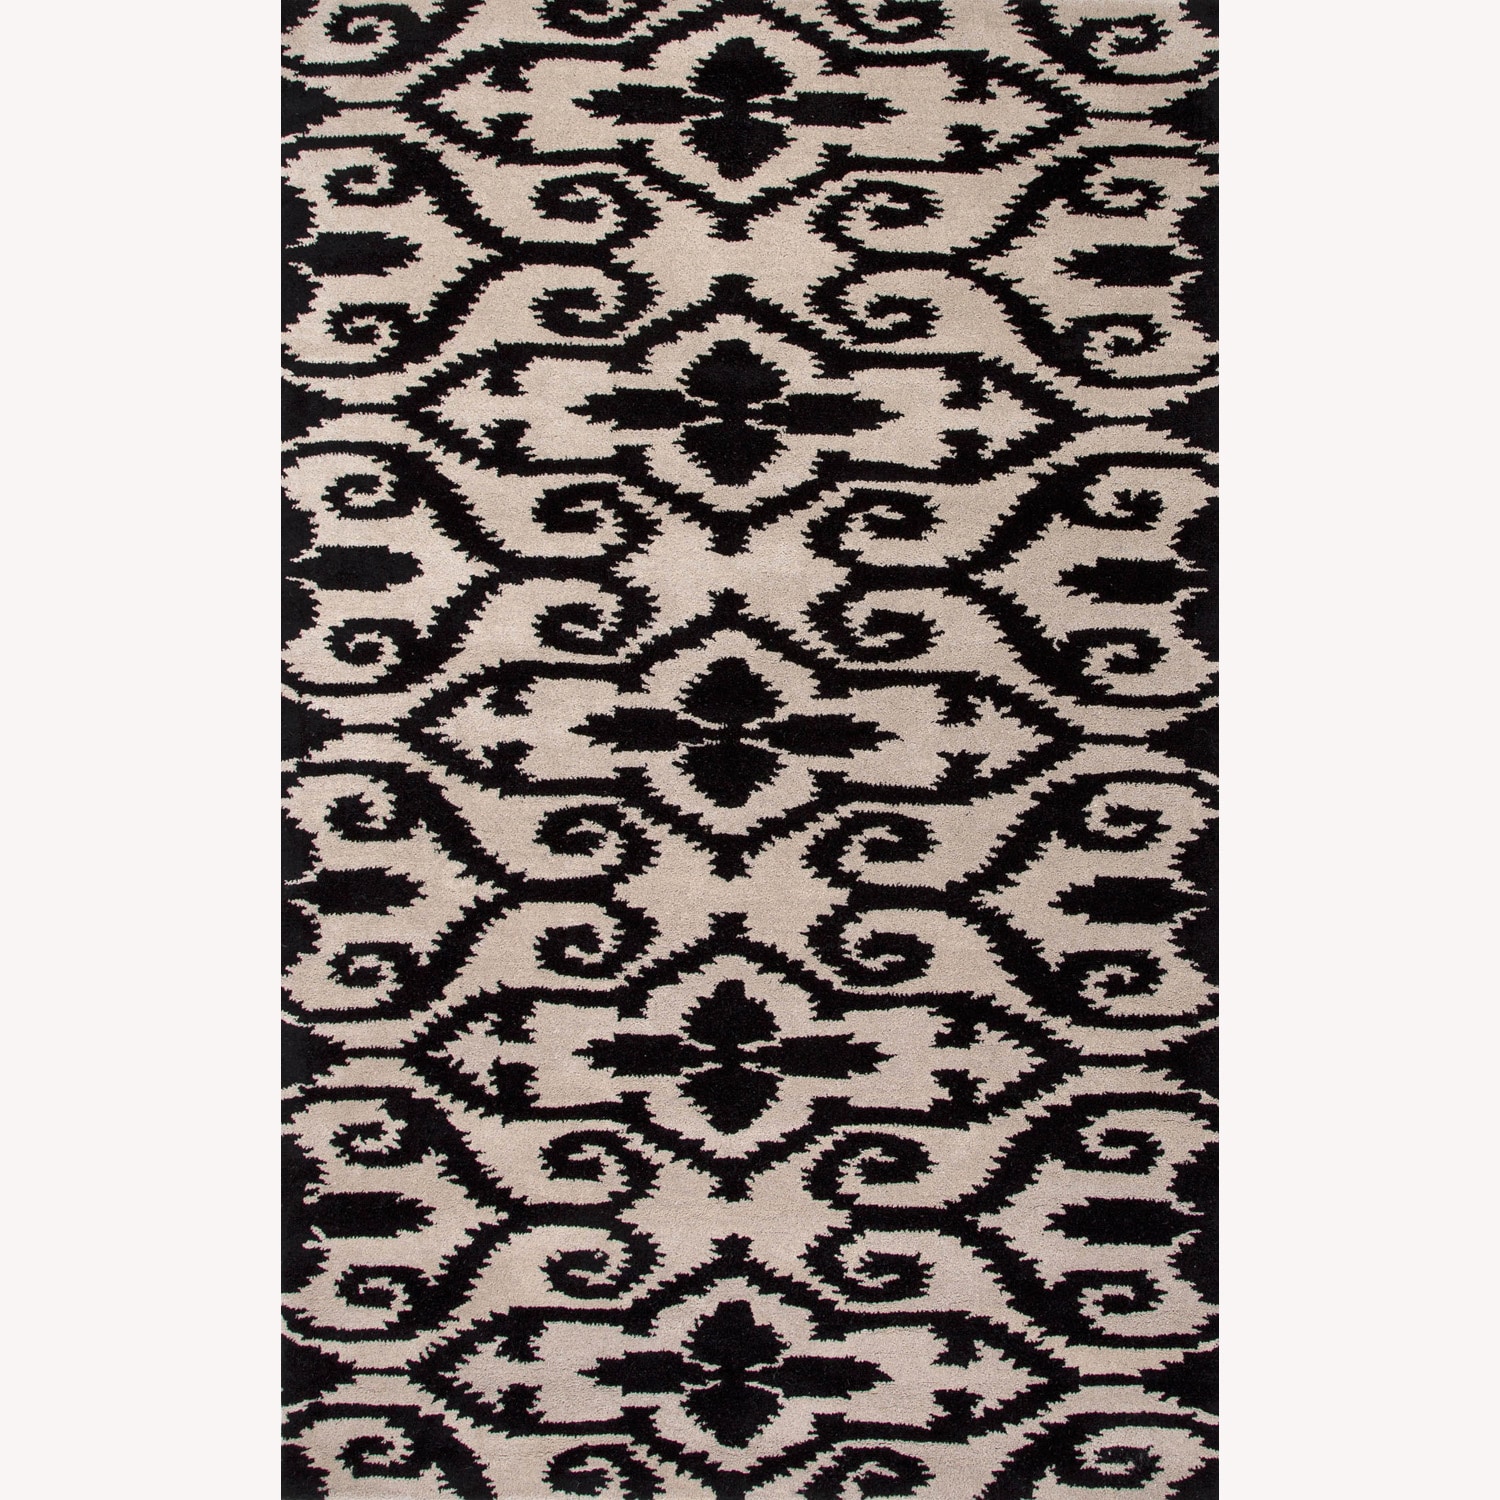 Hand tufted Floral Pattern Ivory/grey Wool Rug (5x8)